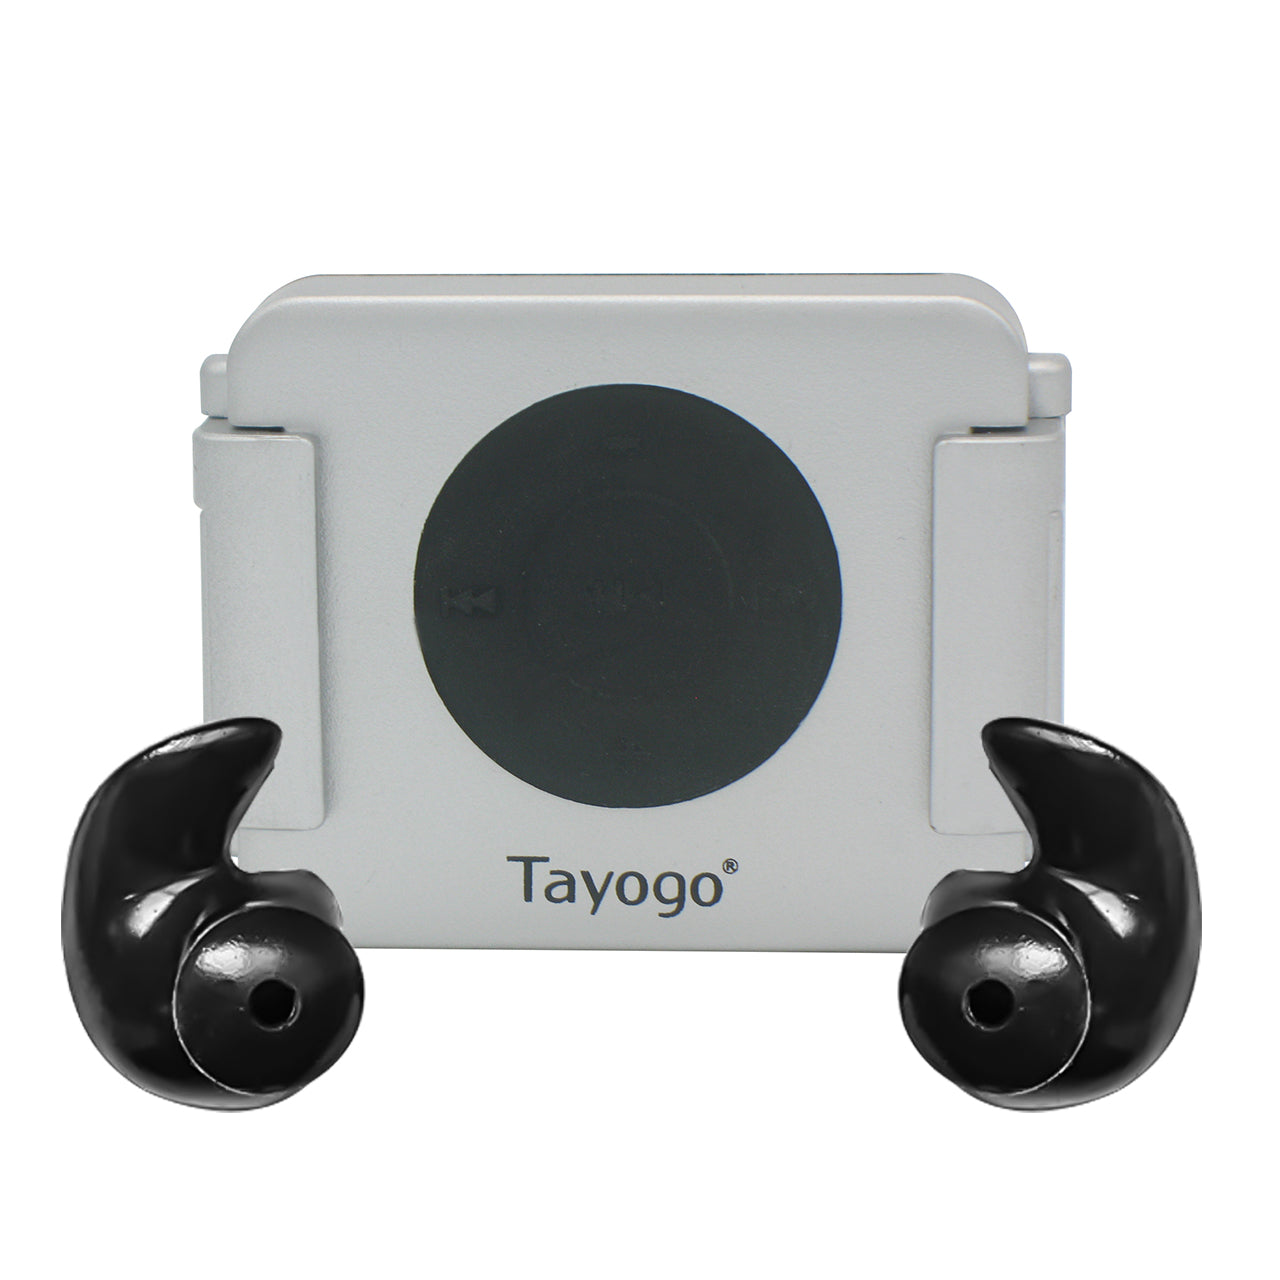 Tayogo iPod Shuffle Waterproof Case for Swimming, Surfing, Boating, Running, and More